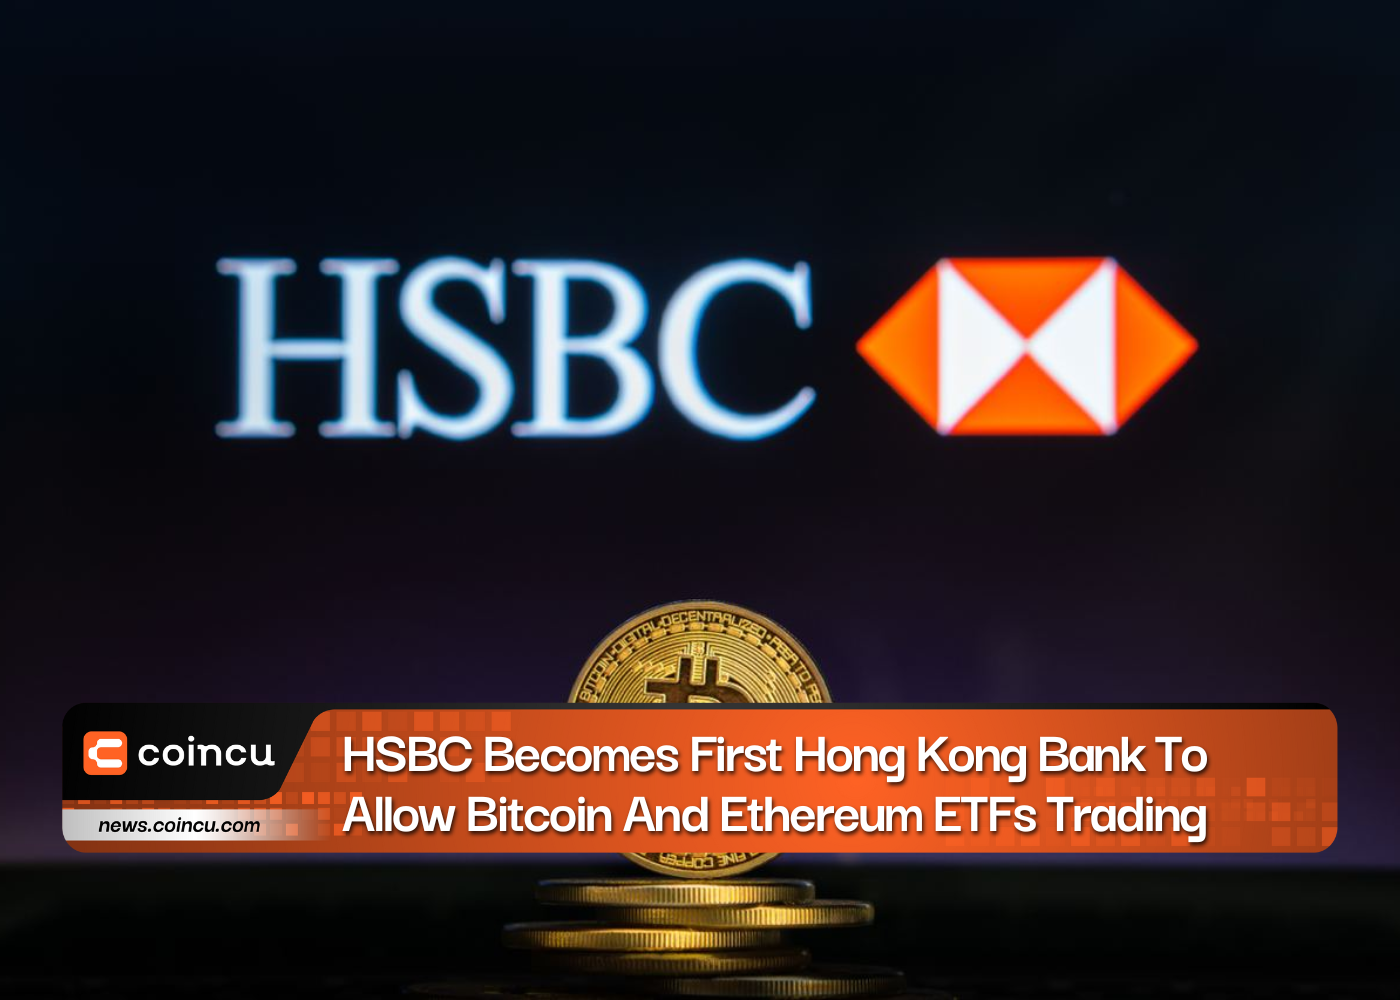 HSBC Becomes First Hong Kong Bank To Allow Bitcoin And Ethereum ETFs Trading